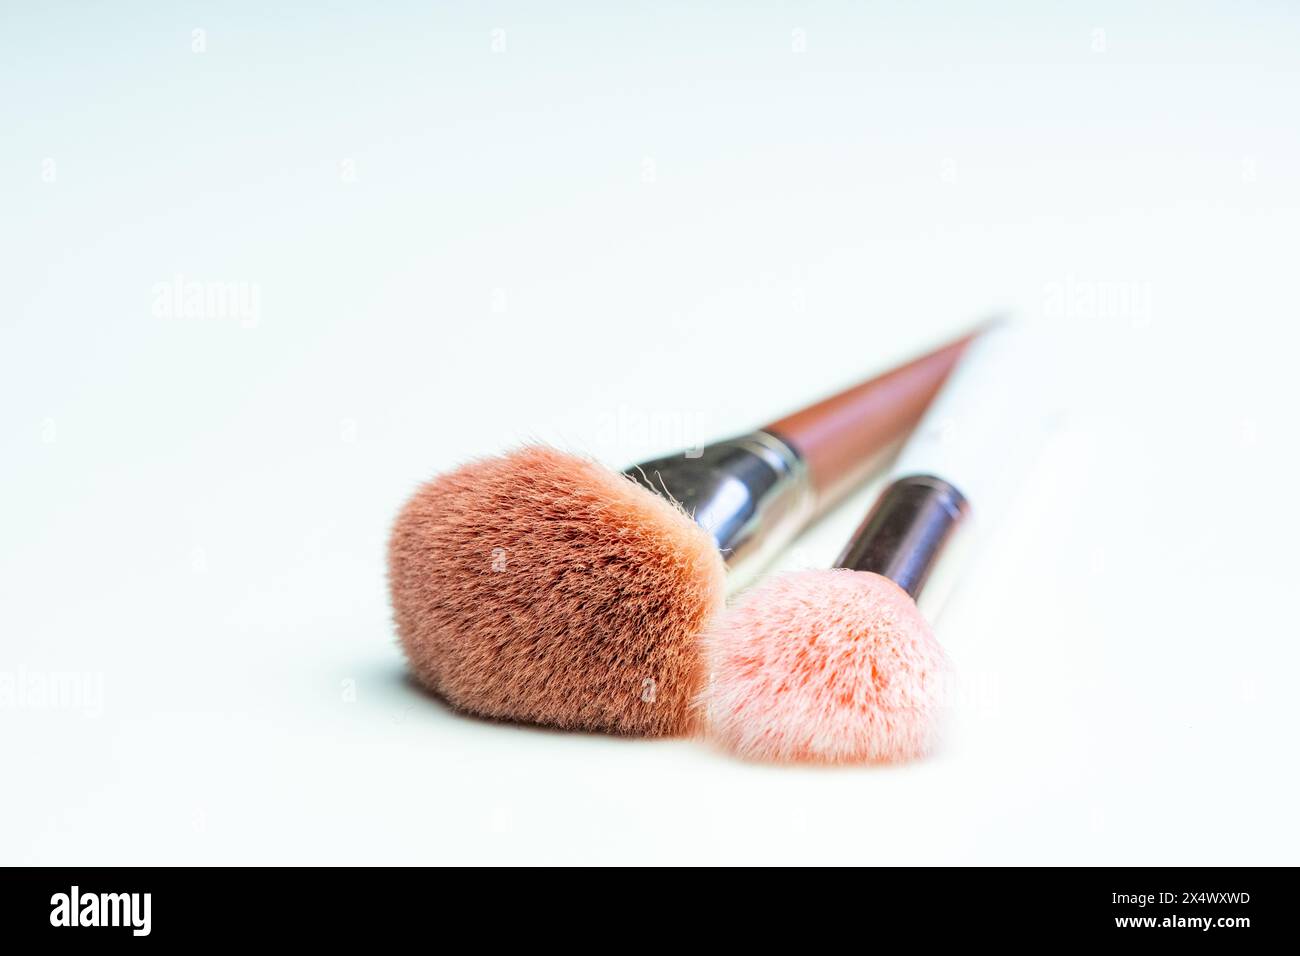 Close-up view of two makeup brushes. One makeup brush with pink bristles and a white handle, and the other with brown bristles and a brown handle Stock Photo